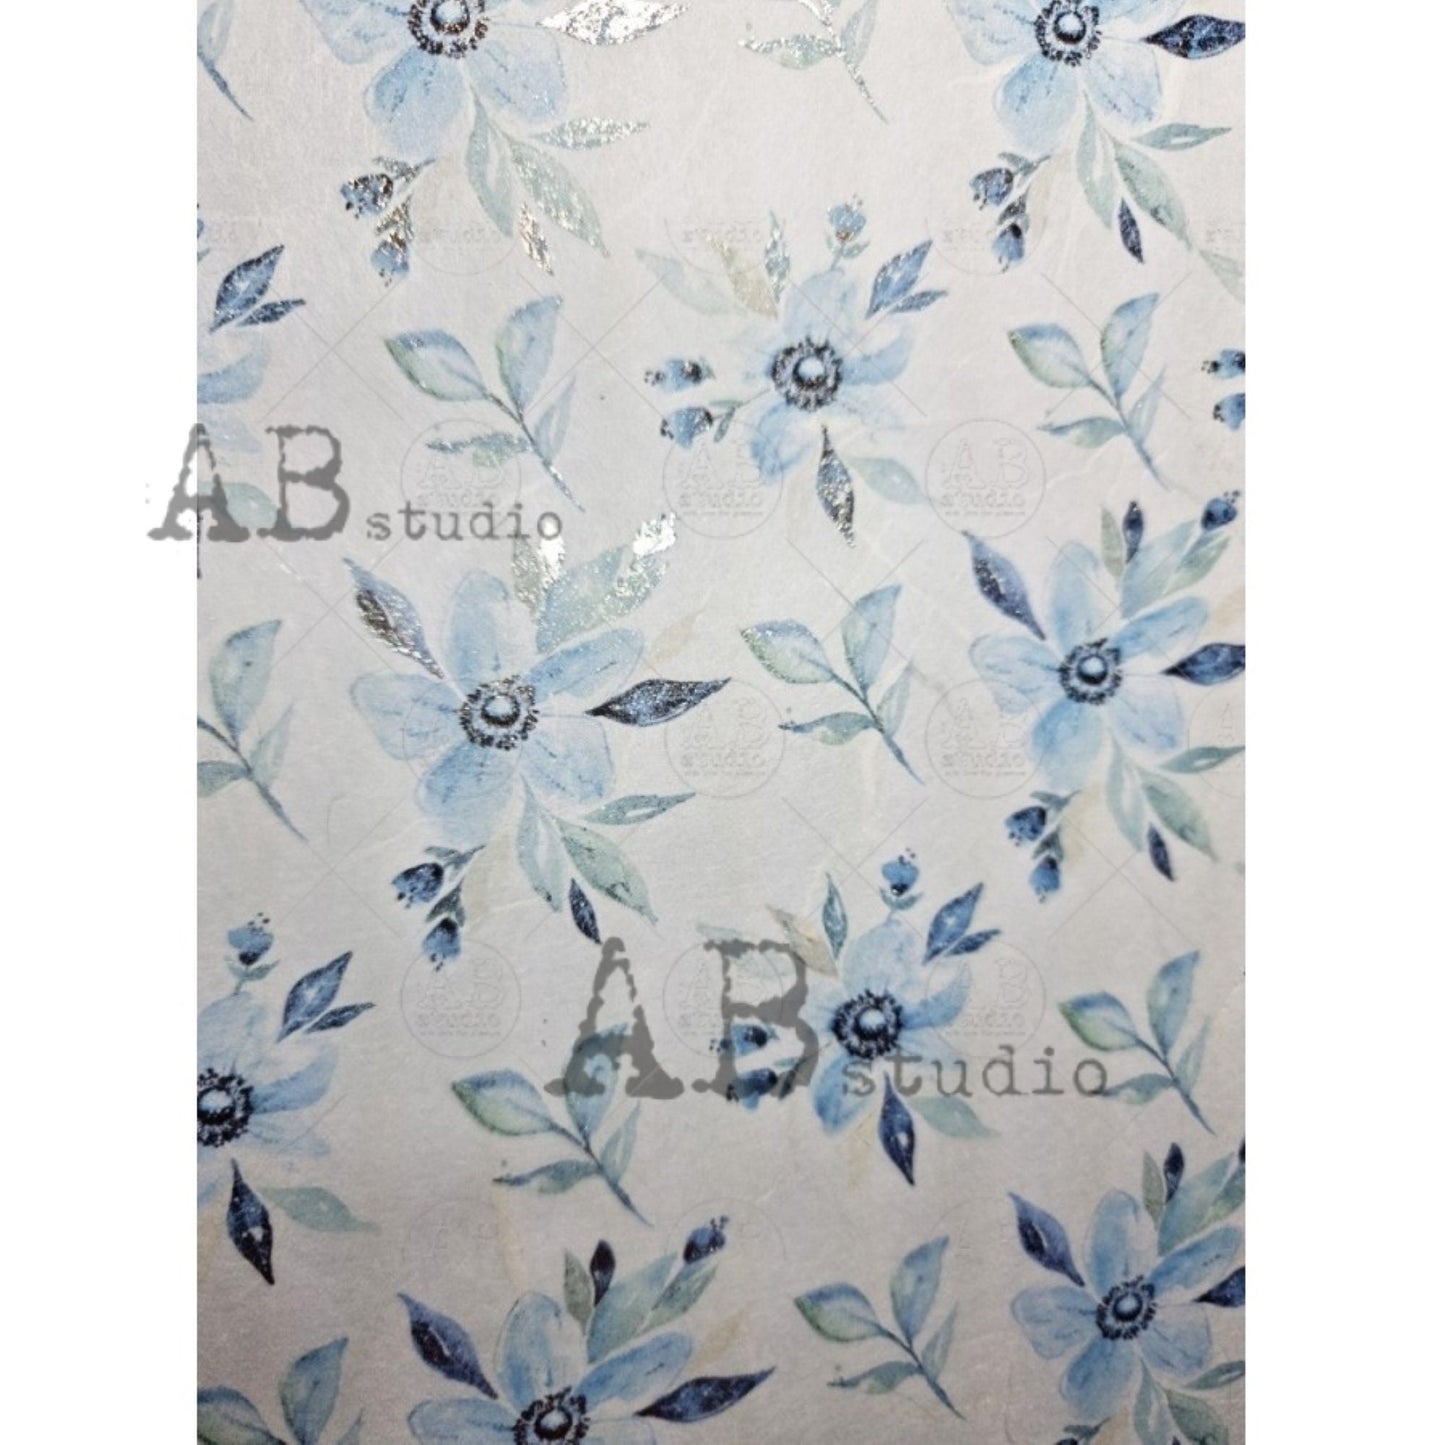 AB Studio Shabby Chic Blue Flowers, Leaves, Silver, Gilded Rice Paper for Decoupage, Background, 1558, A4  8.27 X 11.69 Imported Poland